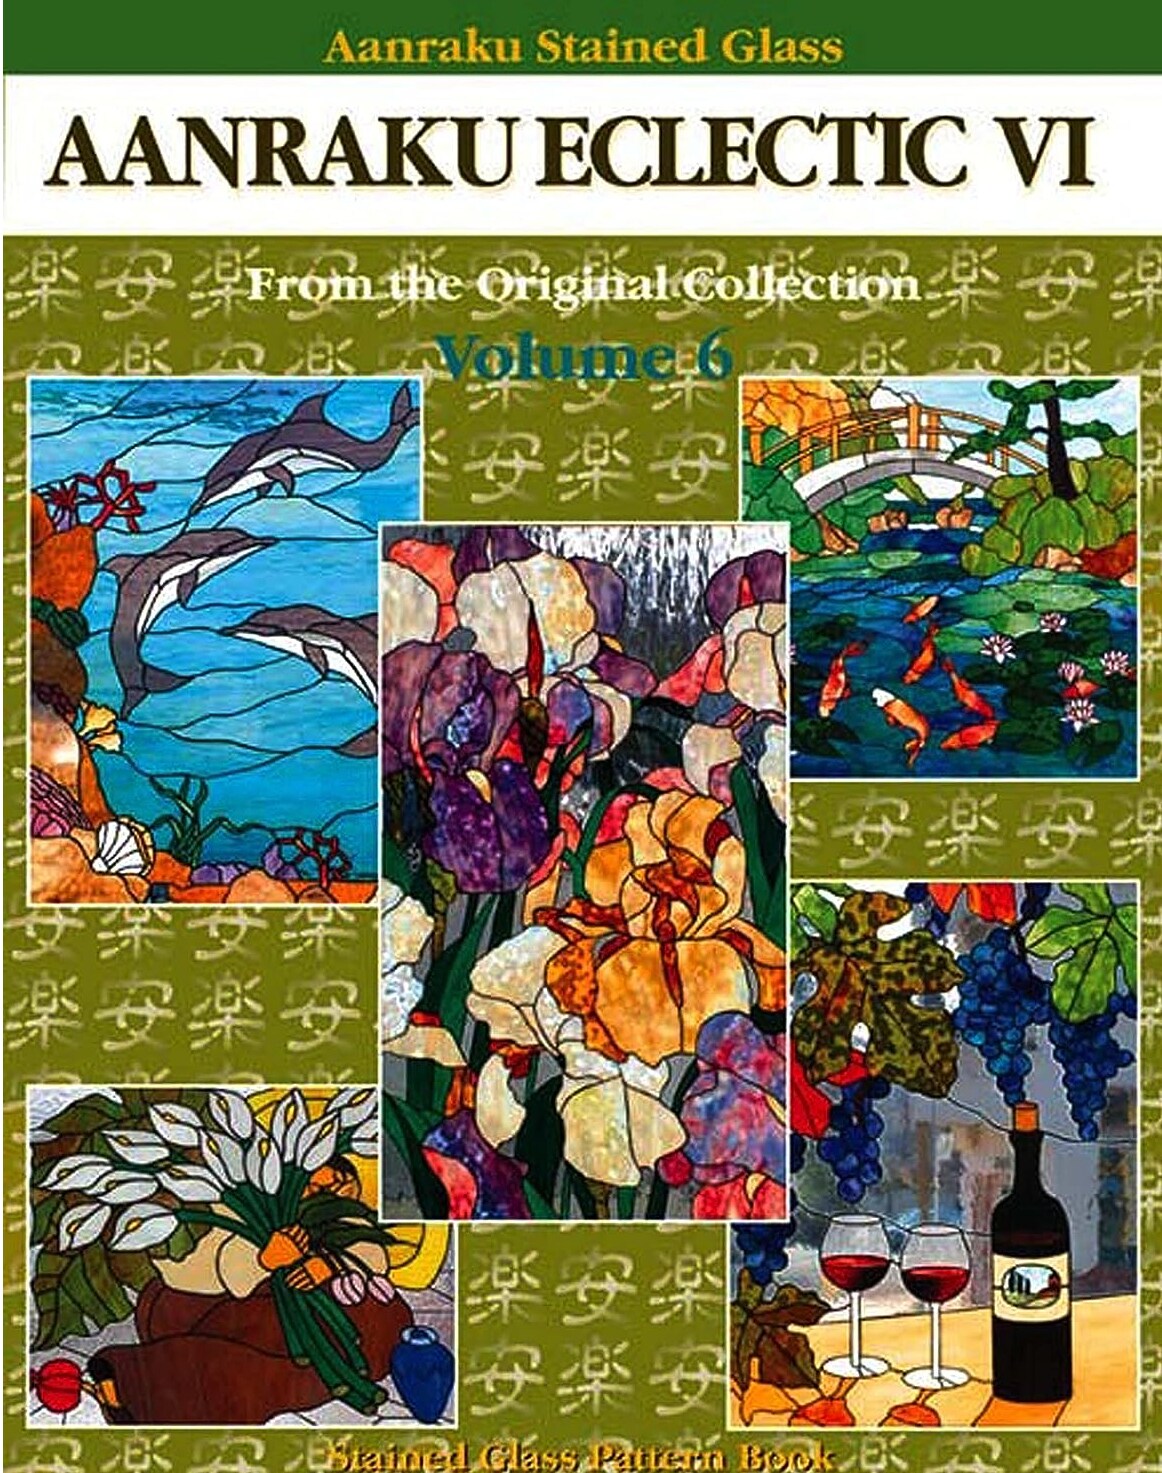 Stained Glass Pattern Book: Aanraku Eclectic Stained Glass Pattern Book Volume 6